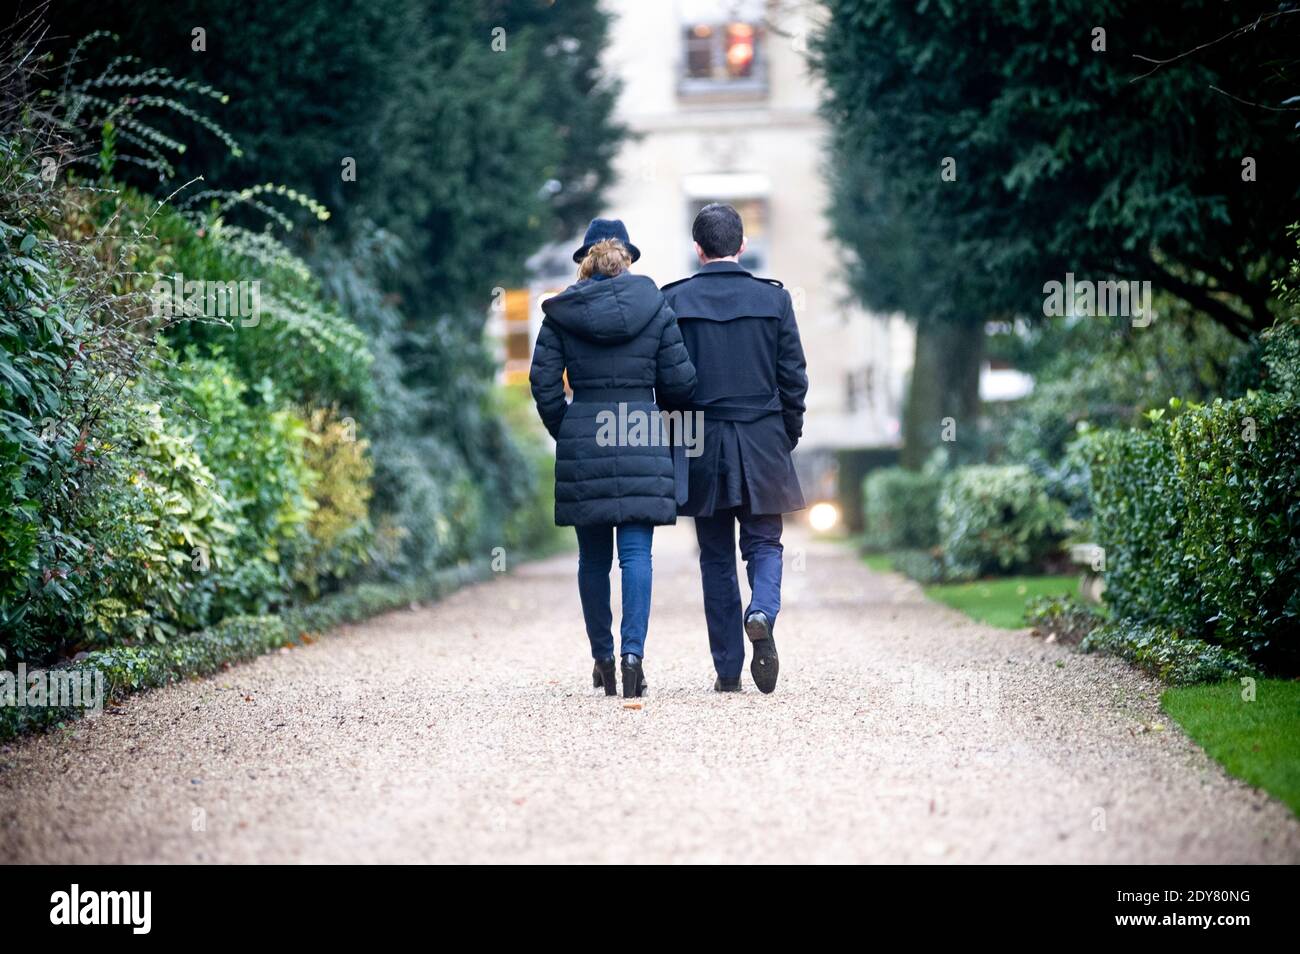 French Prime Minister Manuel Valls along with his wife Anne Gravoin leaves after planting the tree called 'of the Prime Minister' - as is the republican tradition - in the gardens of his headquarters Hotel de Matignon in Paris, France on December 16, 2014. The tree, chosen by the Prime Minister, is an oak of the species 'Quercus robur fastigiata' and is located on the front lawn. The tradition of planting a tree at the PM's headquarters was introduced by the late Prime Minister Raymond Barre in 1978. Photo Pool by Nicolas Messyasz/ABACAPRESS.COM Stock Photo